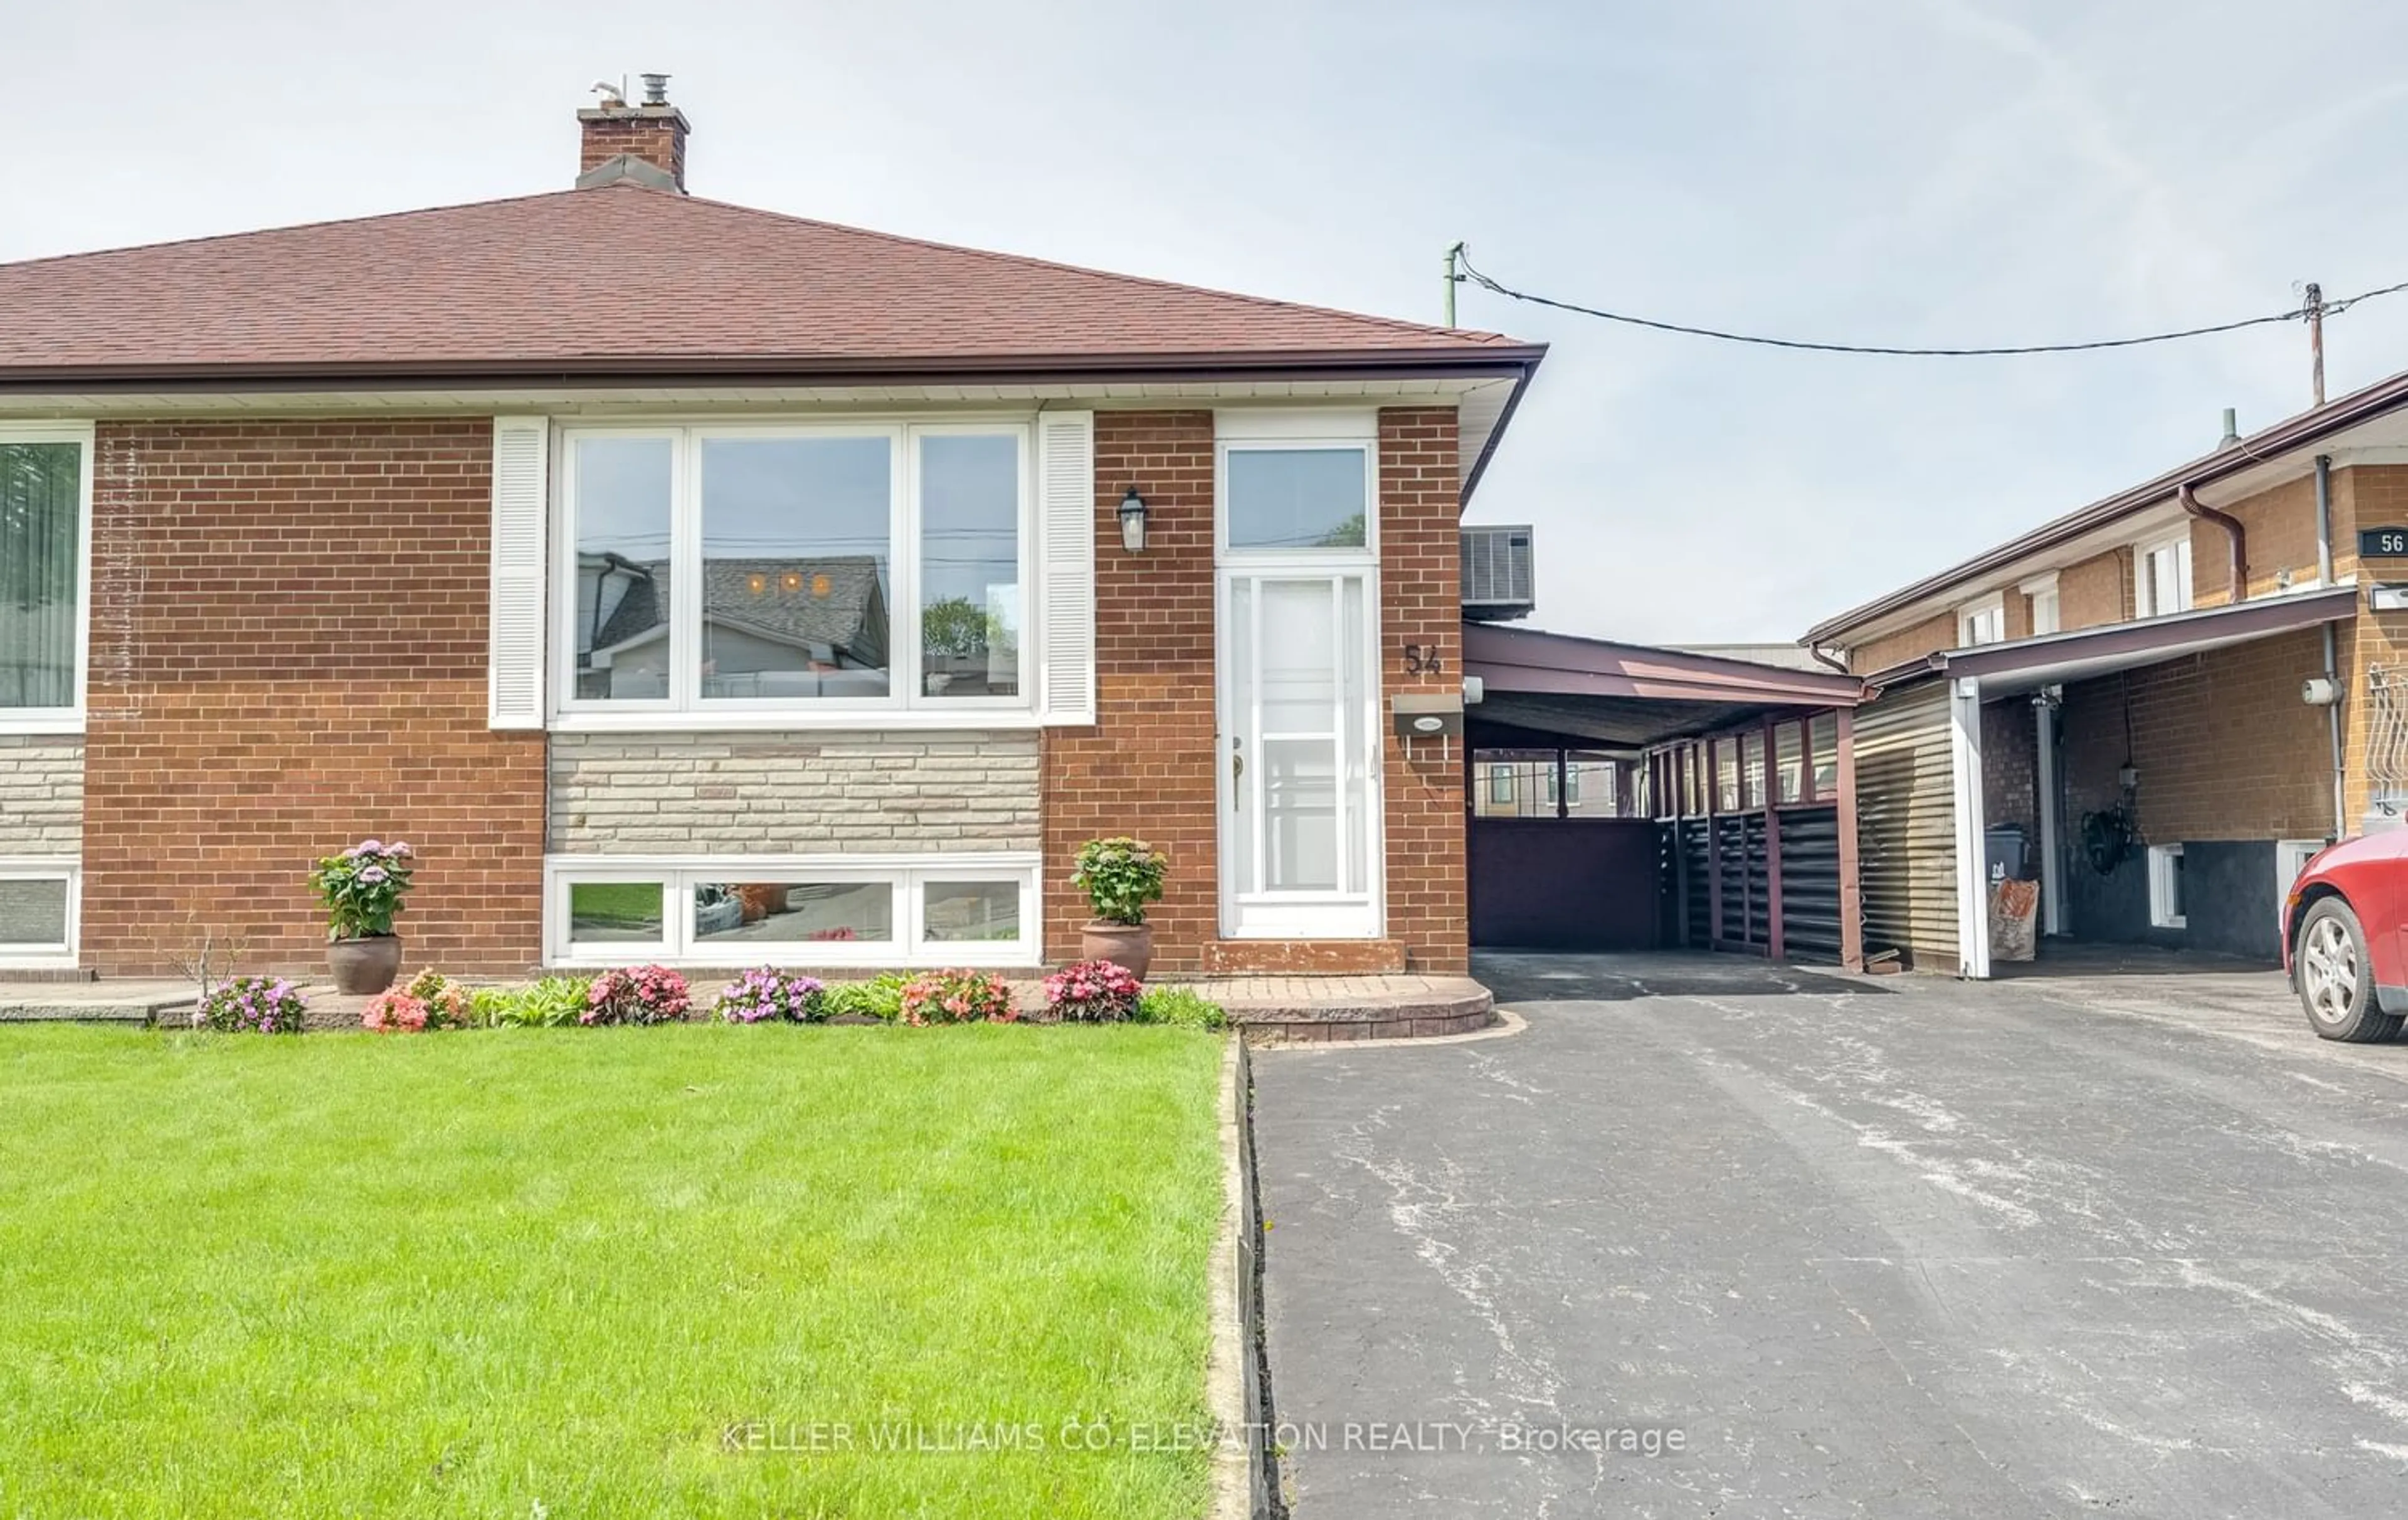 Home with brick exterior material for 54 Pinebrook Ave, Toronto Ontario M4A 1Z2